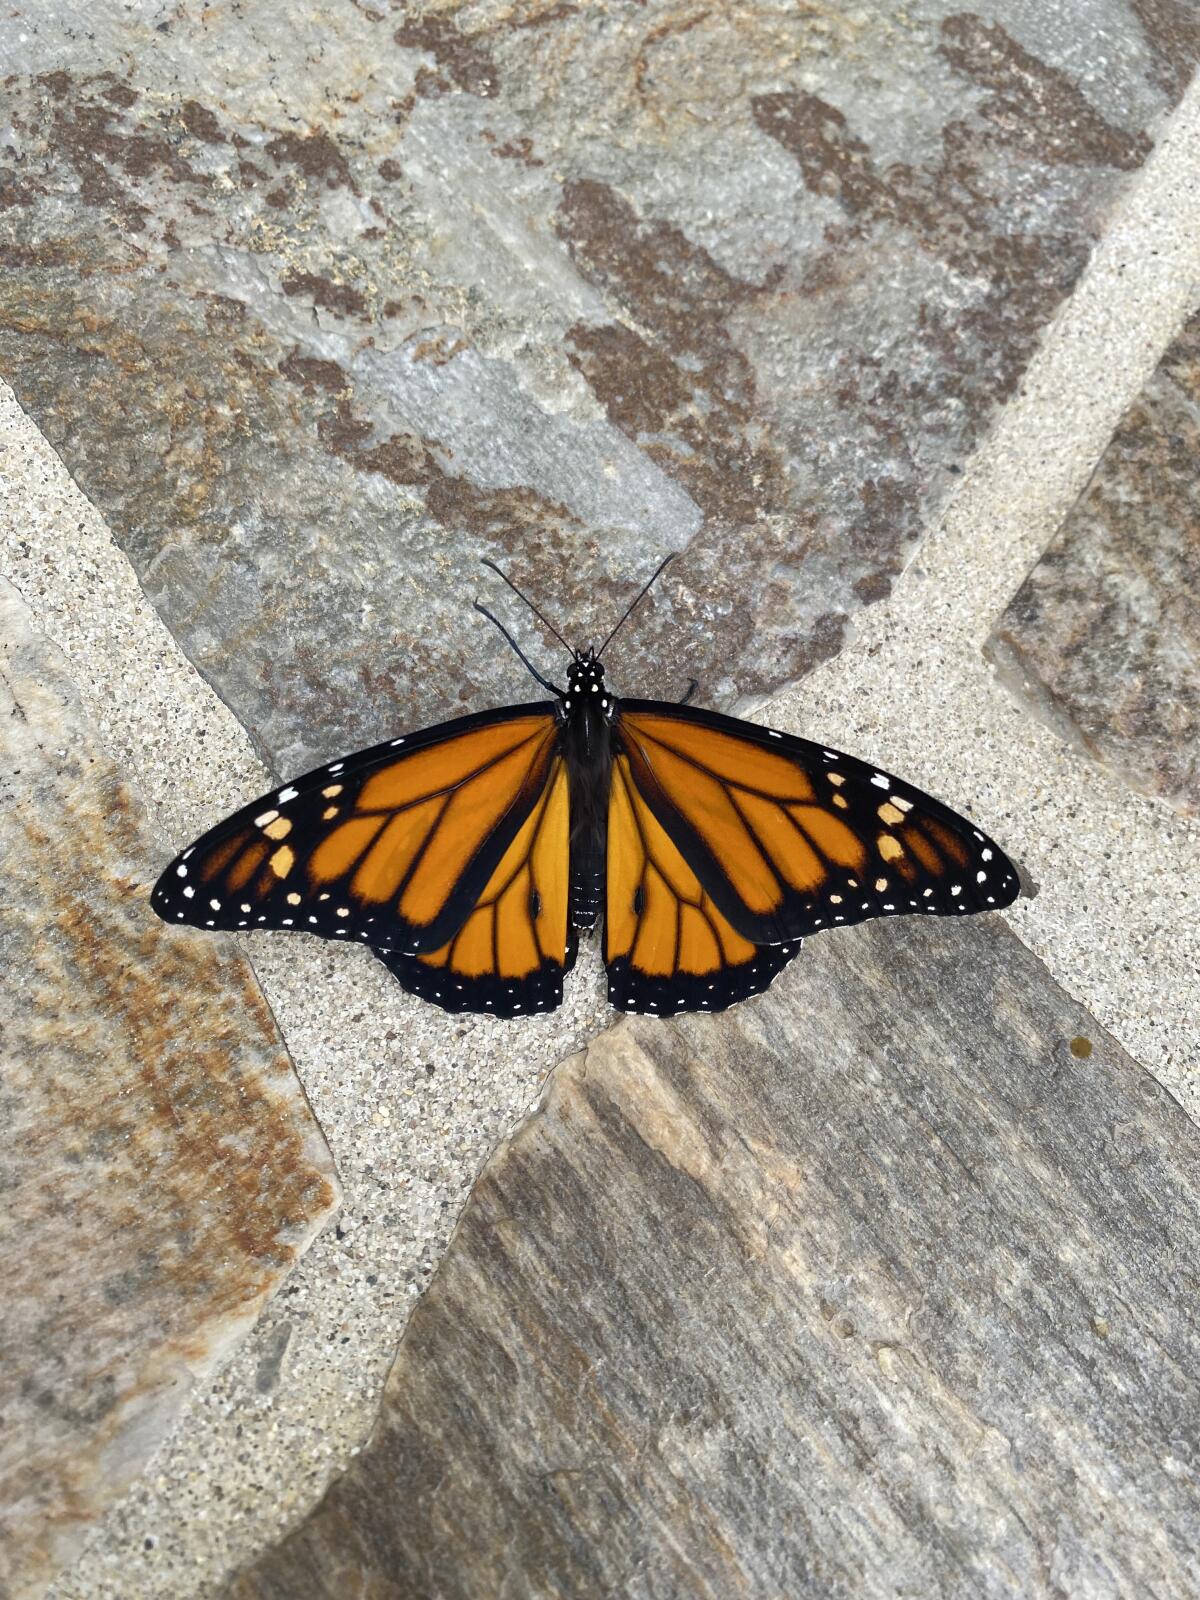 A monarch butterfly photographed in Daily Pilot columnist Patrice Apodaca's backyard.